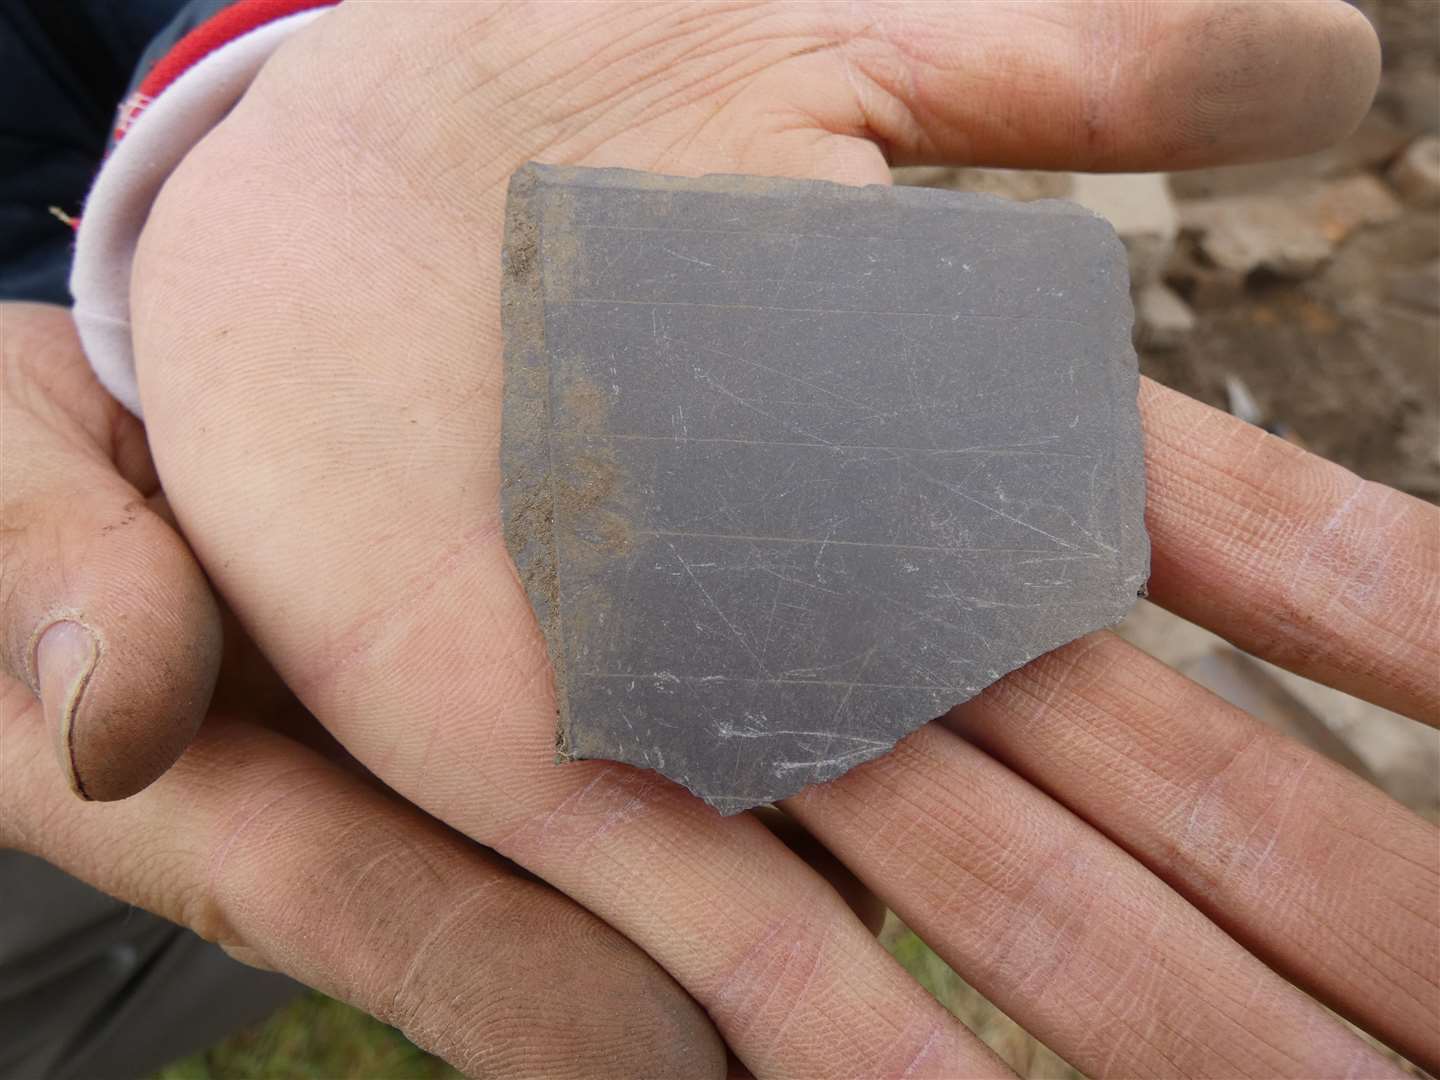 A piece of a slate board was found, with construction lines for writing.